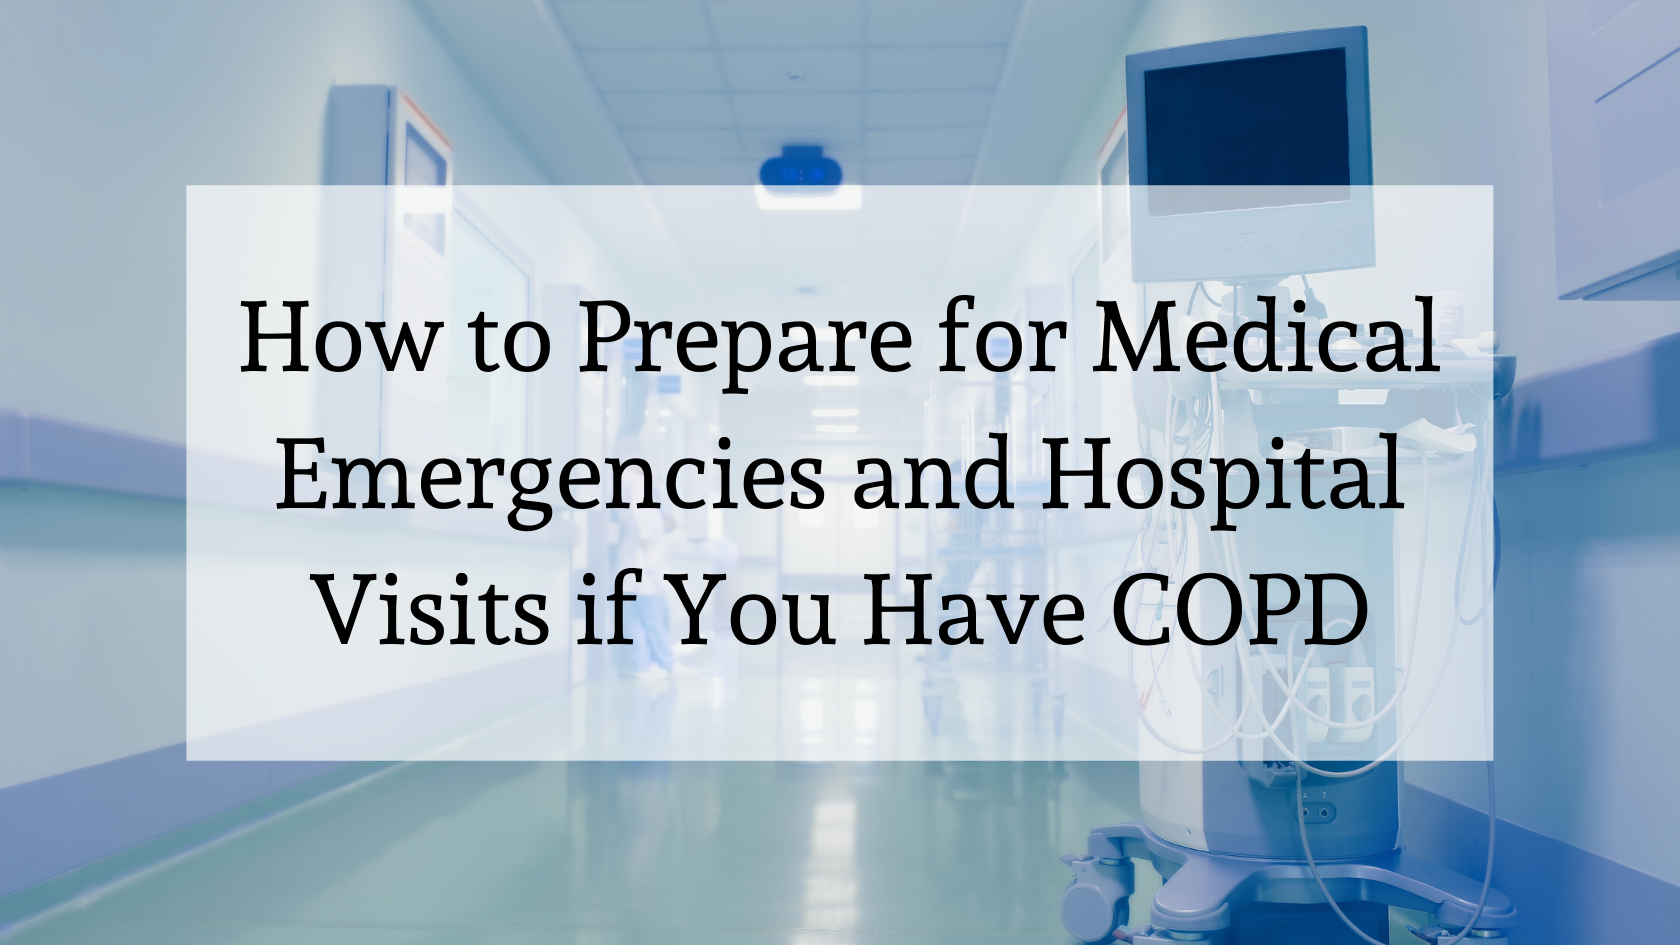 How to Prepare for Medical Emergencies and Hospital Visits if You Have COPD